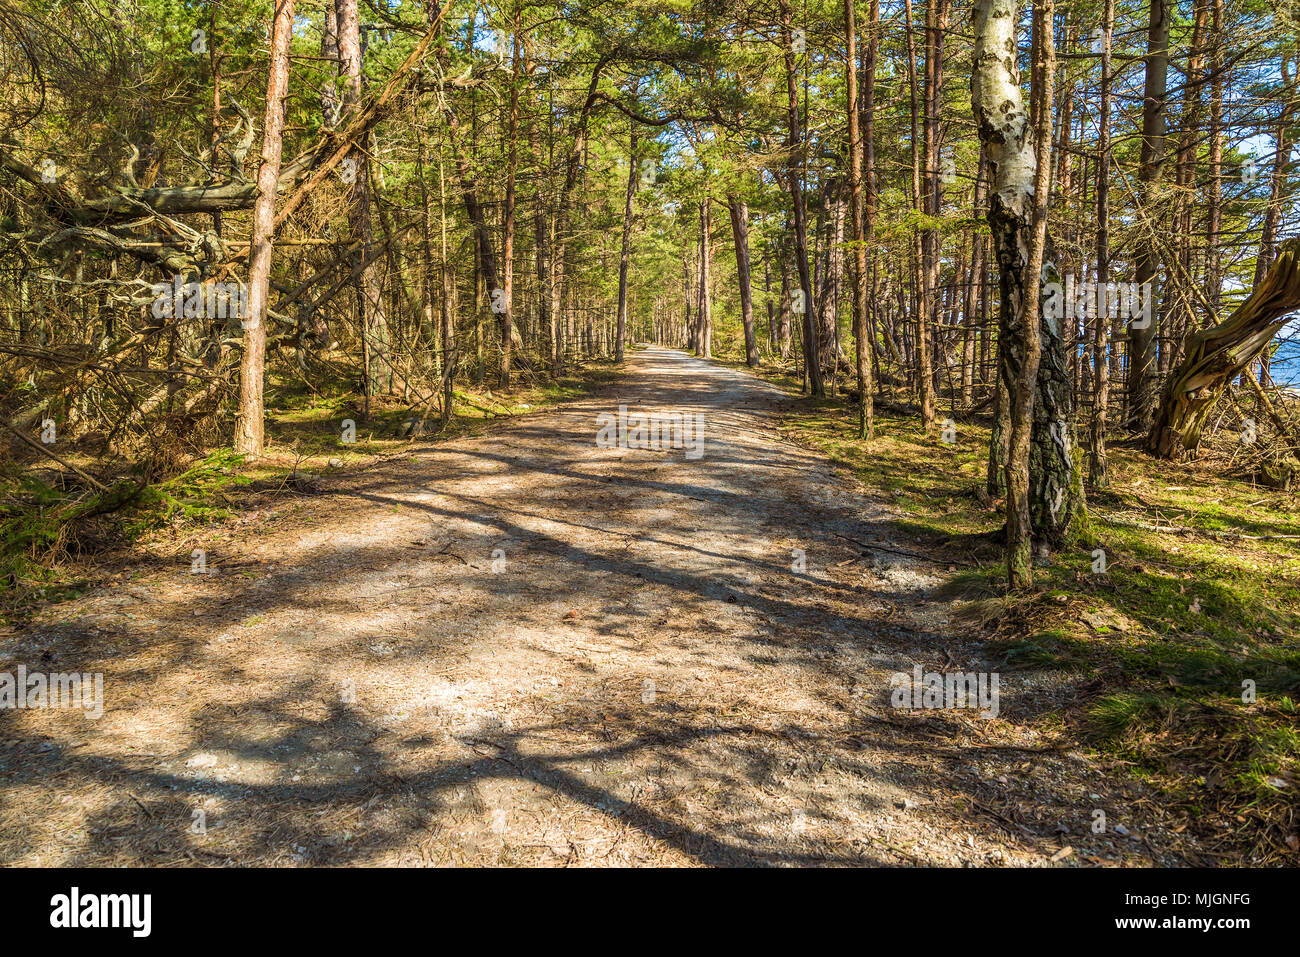 Trollskogen nature reserve on Oland, Sweden. Easy access wide hiking trails through the forest, suitable for trams and wheelchairs, are usual in the r Stock Photo